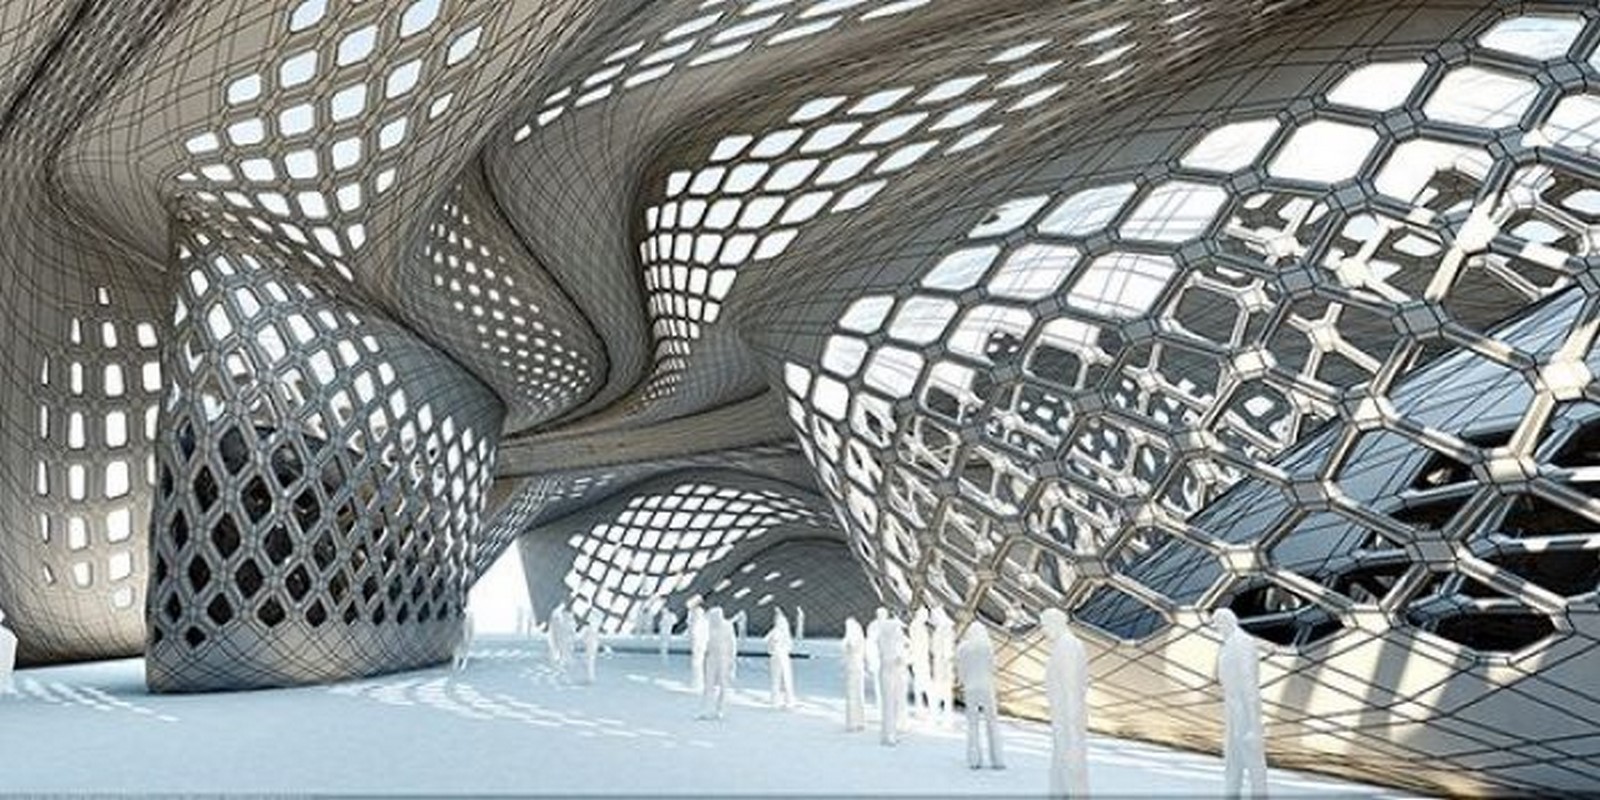 What Effect Would Generative Design Have on Architecture? - Sheet6